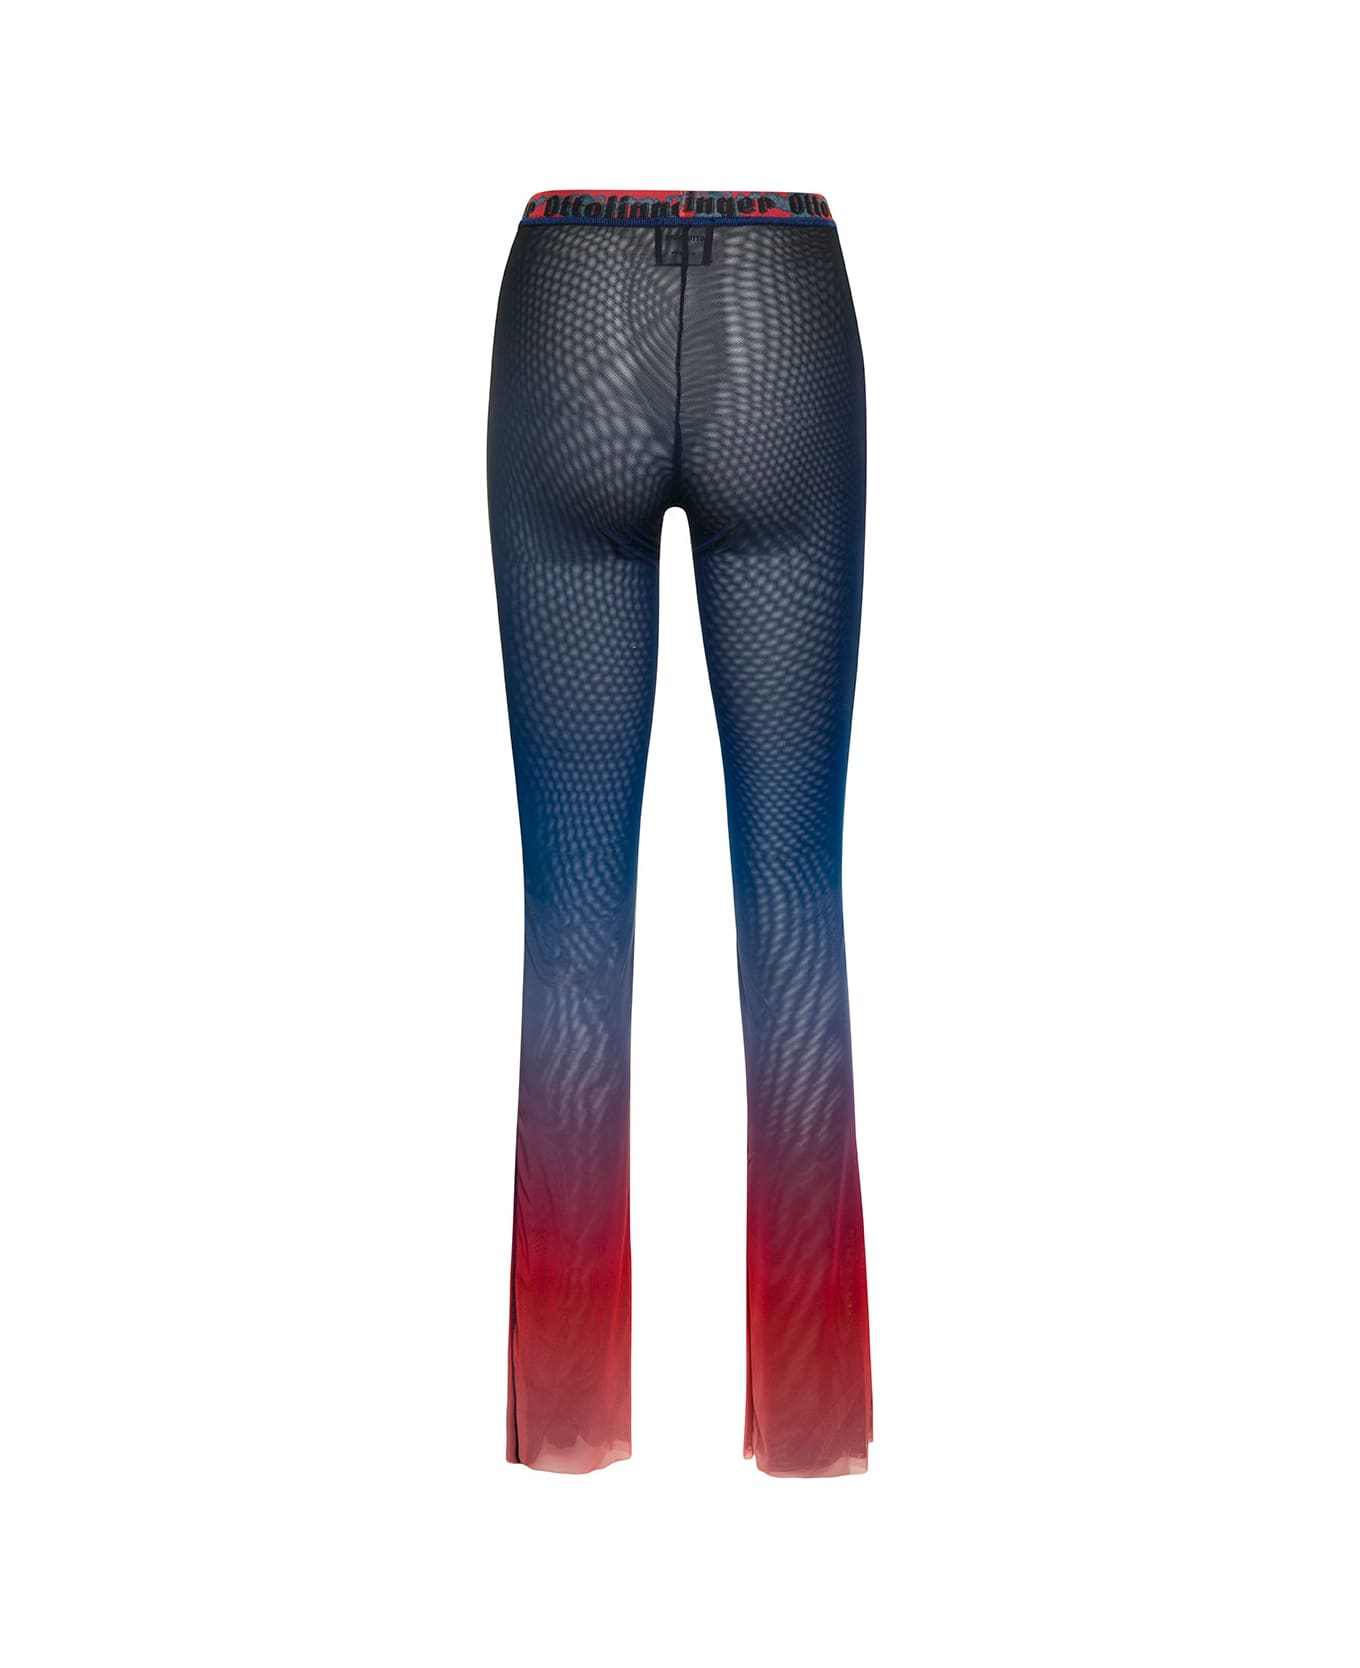 Ottolinger Multicolor Pants With Faded Effect In Mesh Woman - Multicolor